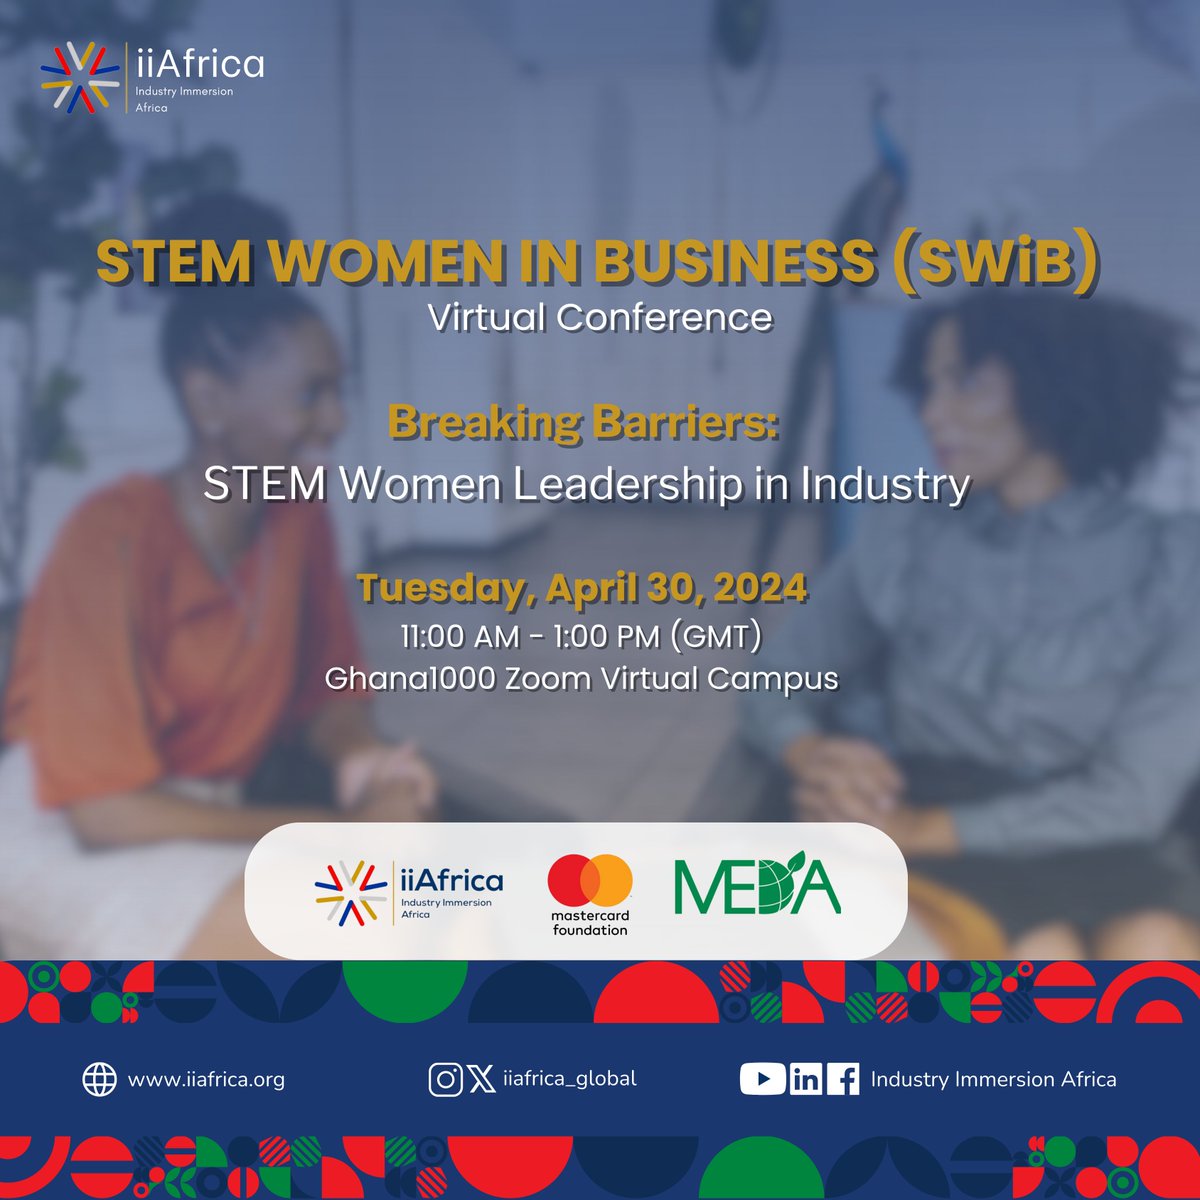 IT'S TODAY!

The SWiB Virtual Conference is live in 4 hours. It's a FREE webinar, but registration is required.

REGISTER HERE: form.jotform.com/241093876062560

LEARN MORE: iiafrica.org/SwibVirtualCon…

#WomenInLeadership #STEMWomenInBusiness #WomenInSTEM #STEMWomen #iiAfrica #SWiB #SWiB2024